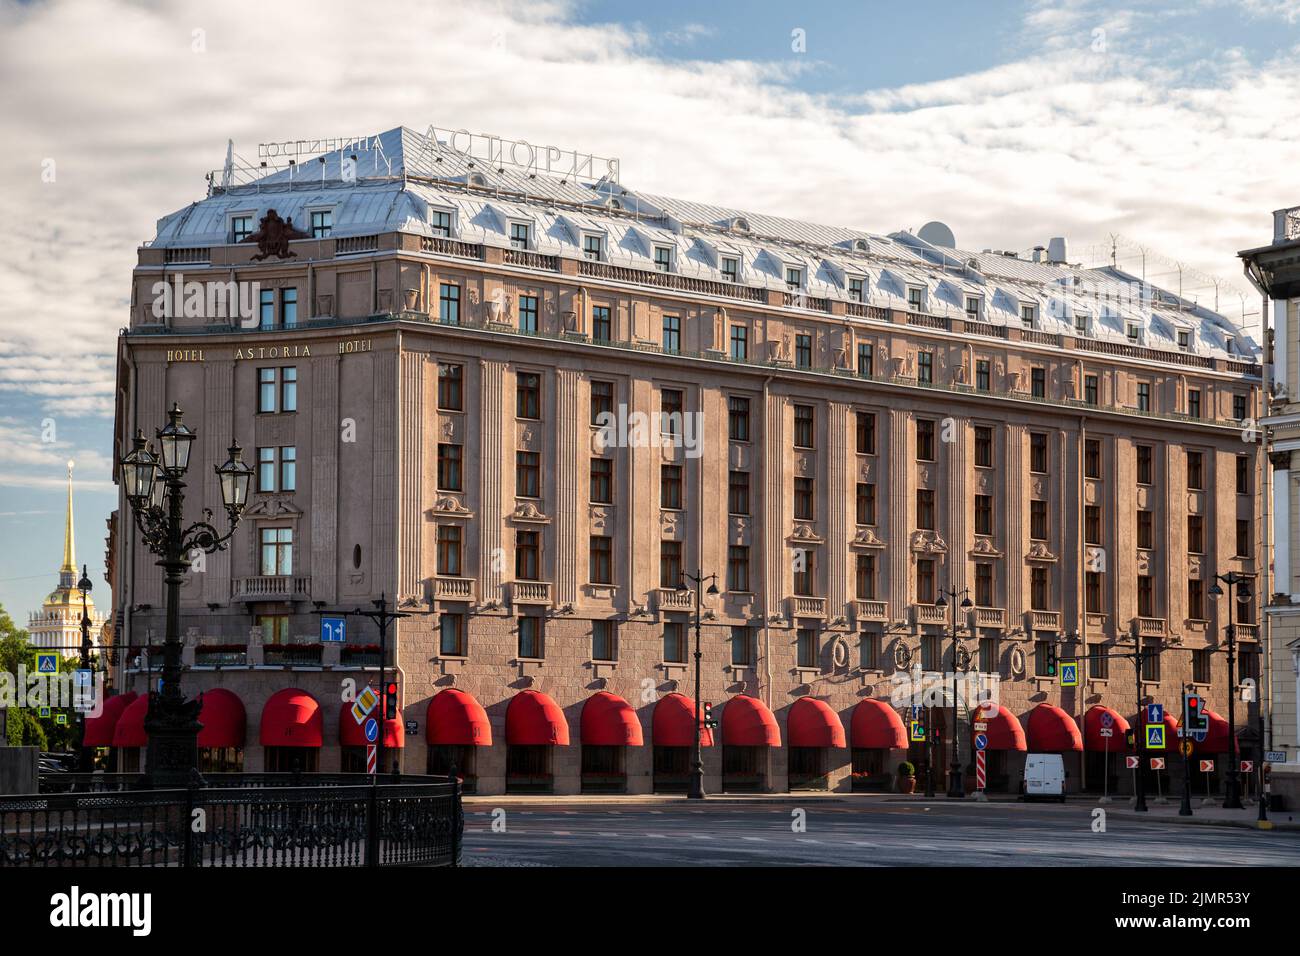 St. Petersburg, Russia - July 17, 2022: The building of the hotel Astoria on St. Isaac's Square in St. Petersburg Stock Photo